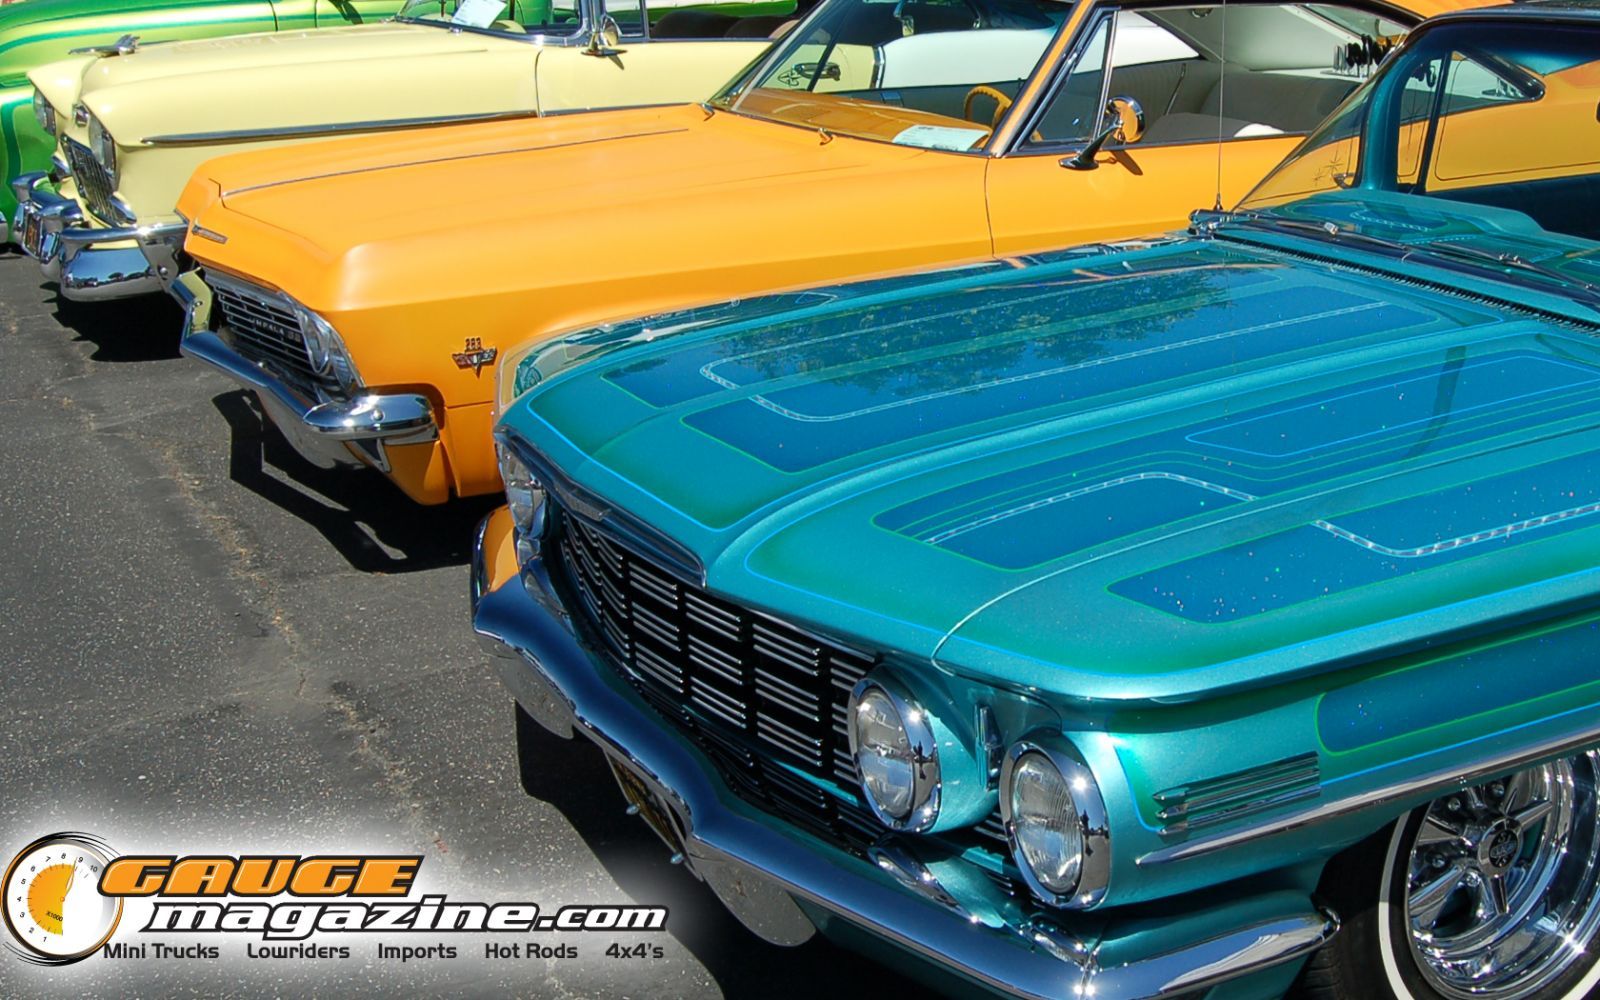 Gauge Magazine | Lowrider Wallpaper from Relaxin in So Cal 2011